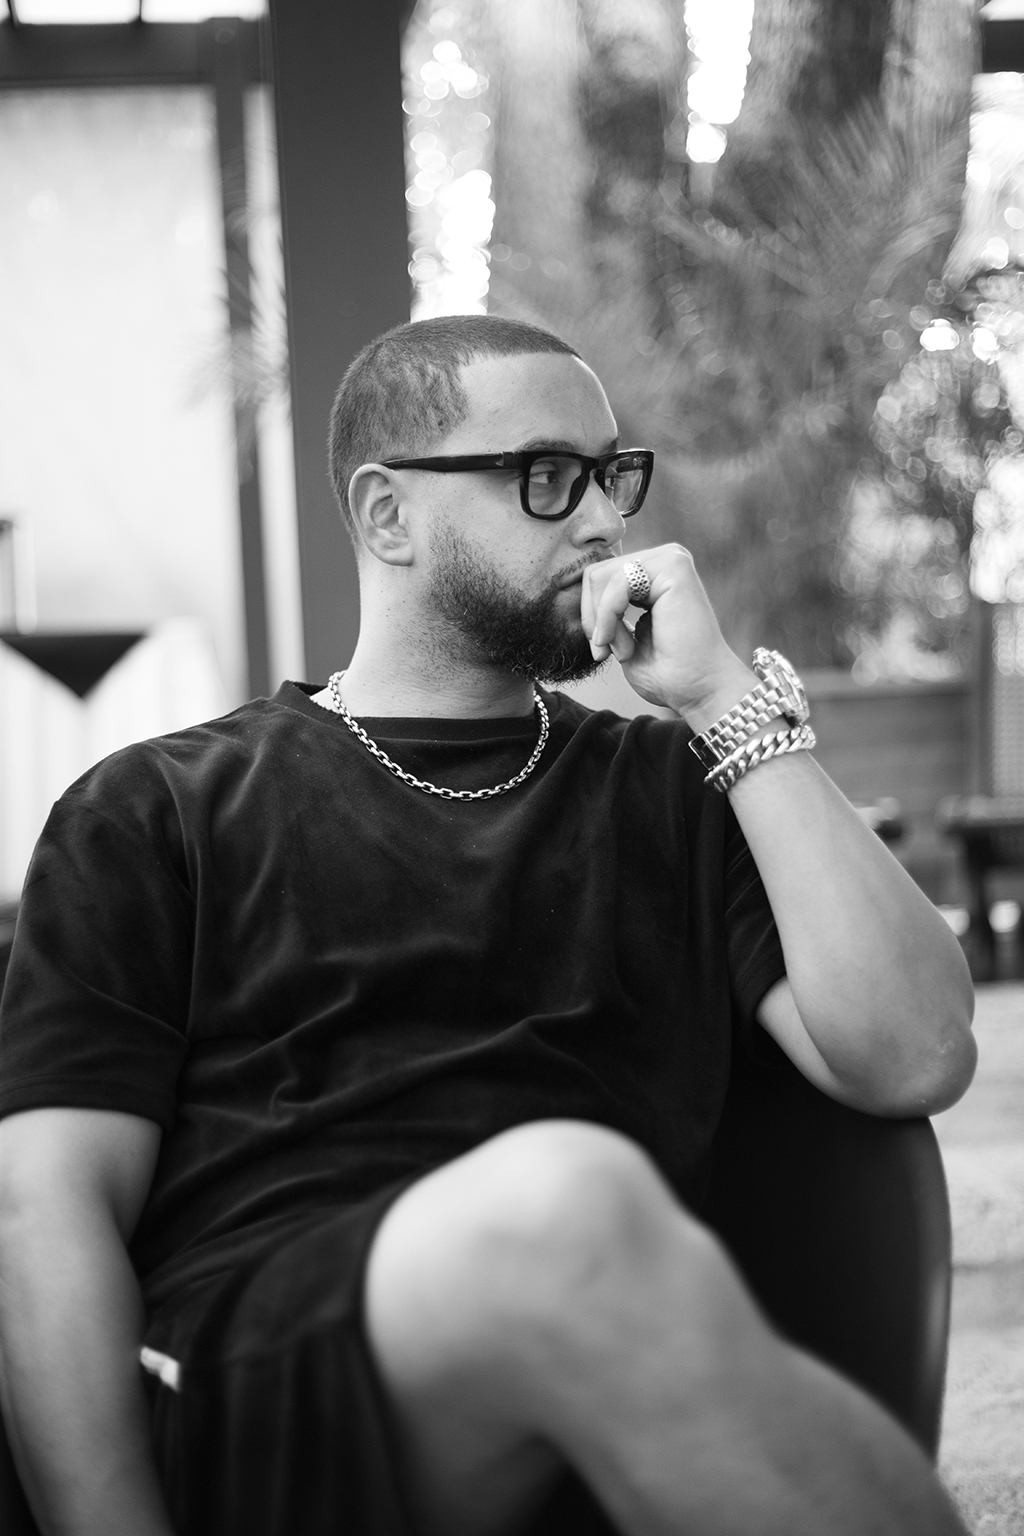 Julien Christian Lutz, professionally known as Director X for Operation Prefrontal Cortex, Mindful Living Barbados, Bridgetown, Barbados, 2019, Photographer: Ajani Charles